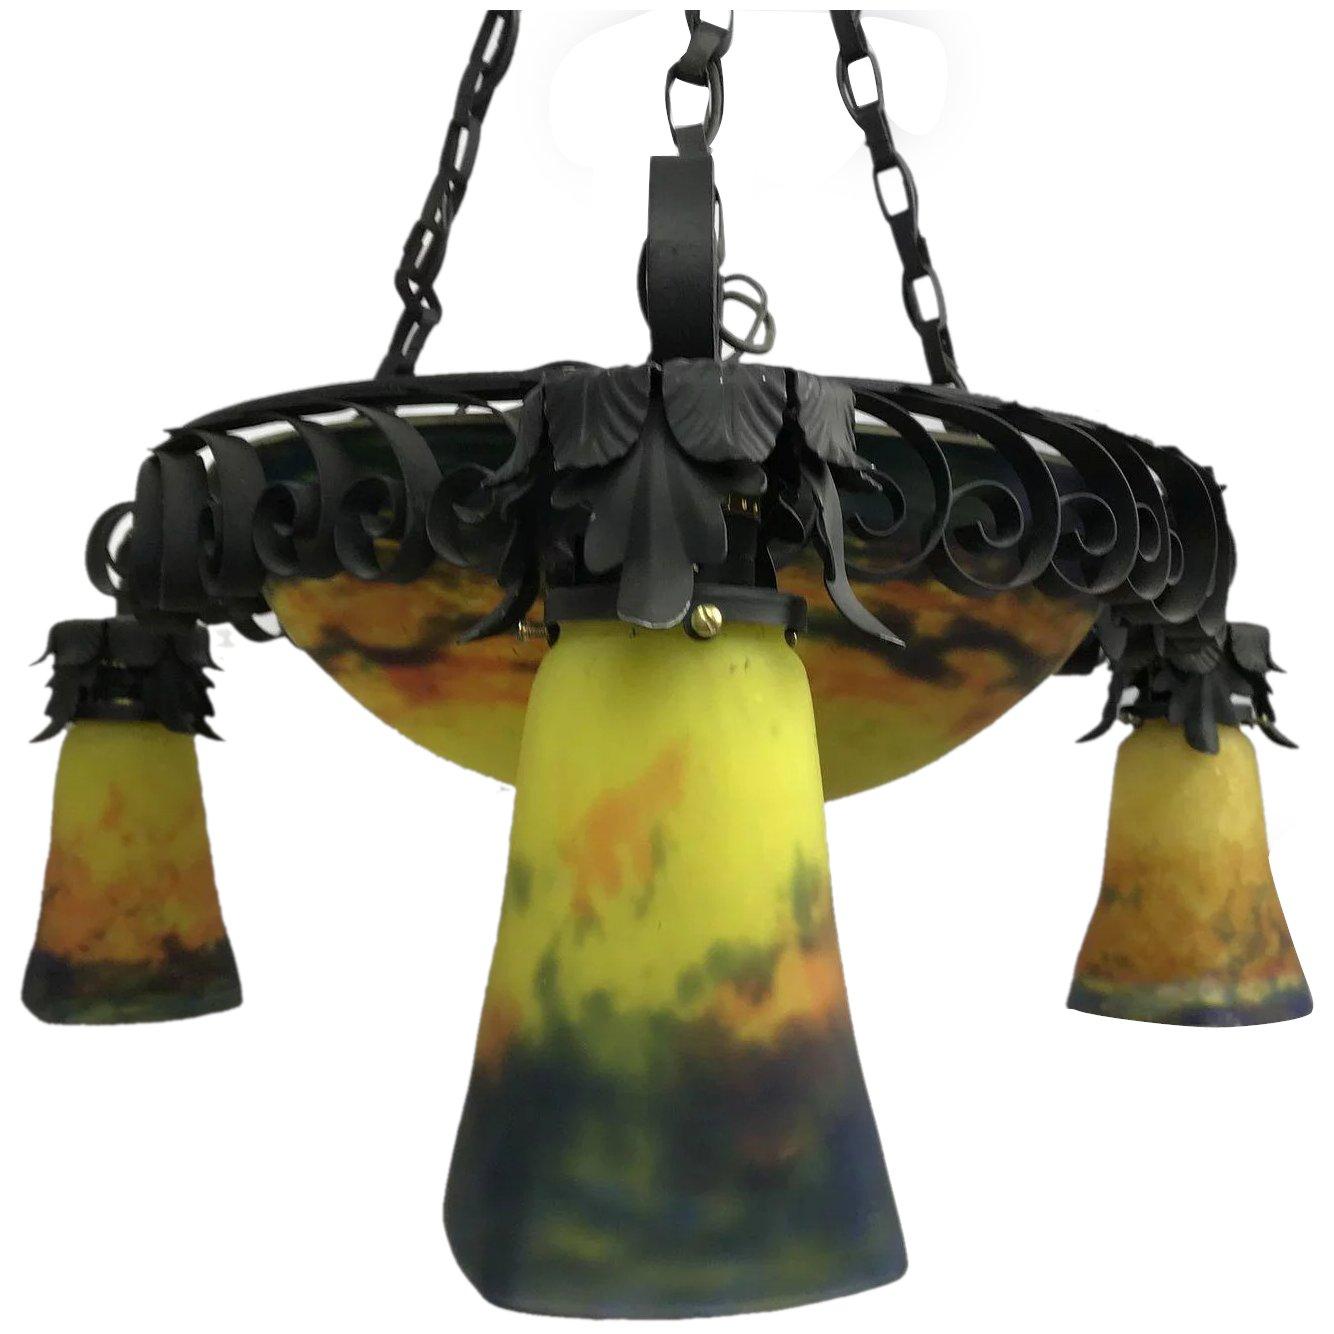 French Art Nouveau chandelier by Muller Freres.

Six lights total, three inside the large centre glass, three individual yellow, orange, and blue globes. Maximal measurements as currently configured 43 inches high, 24-inch diameter. Height could